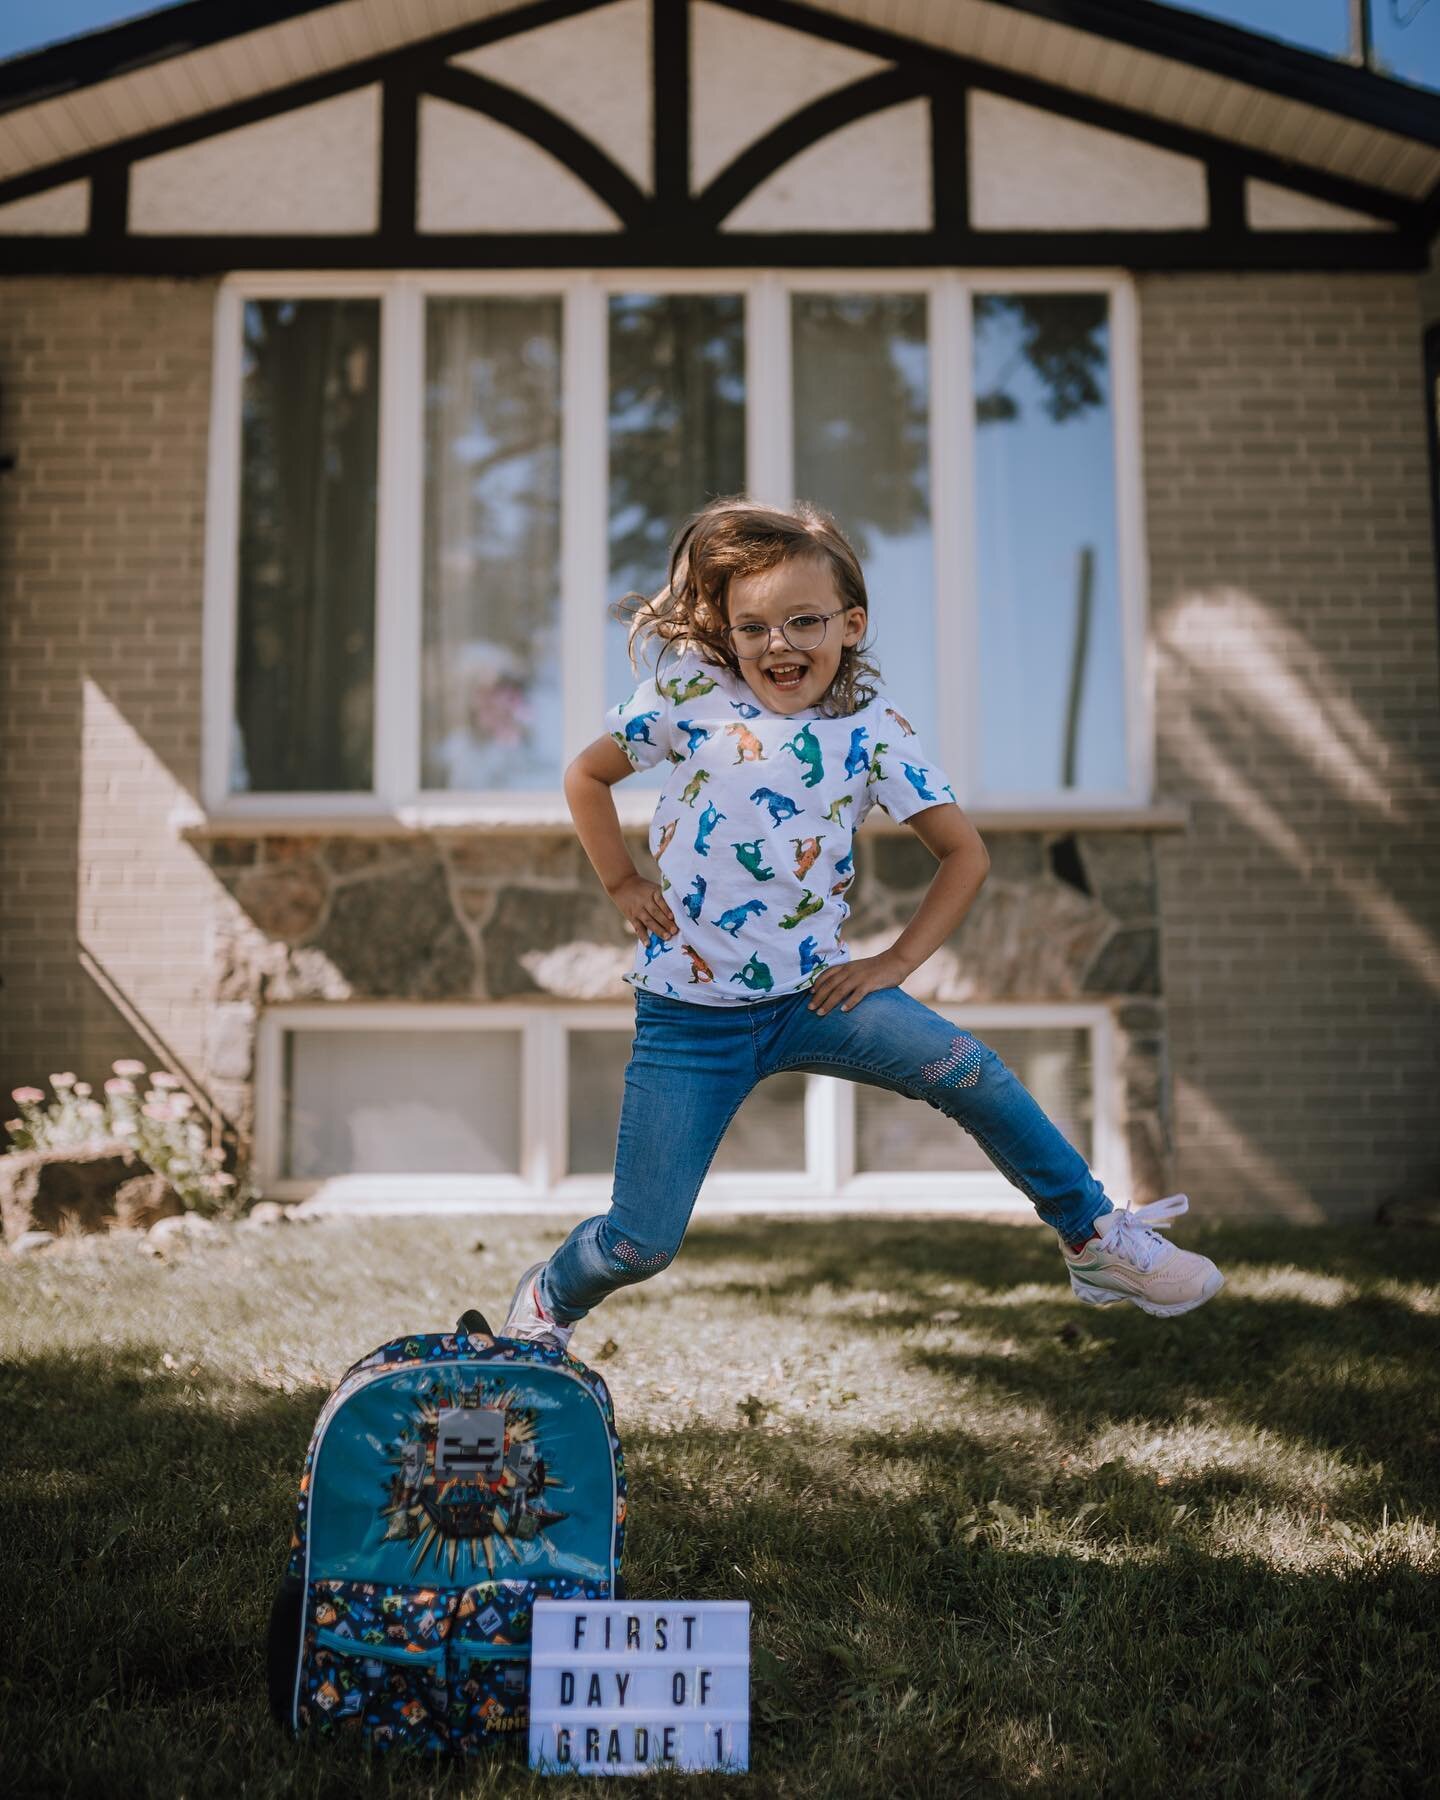 Jumping into school, even if we&rsquo;re not quite ready to say goodbye to summer. 💕

Which vibe are your kids (or you) this week?? 😂 I think I&rsquo;m with Eva in pic 1 - yaaaas!!